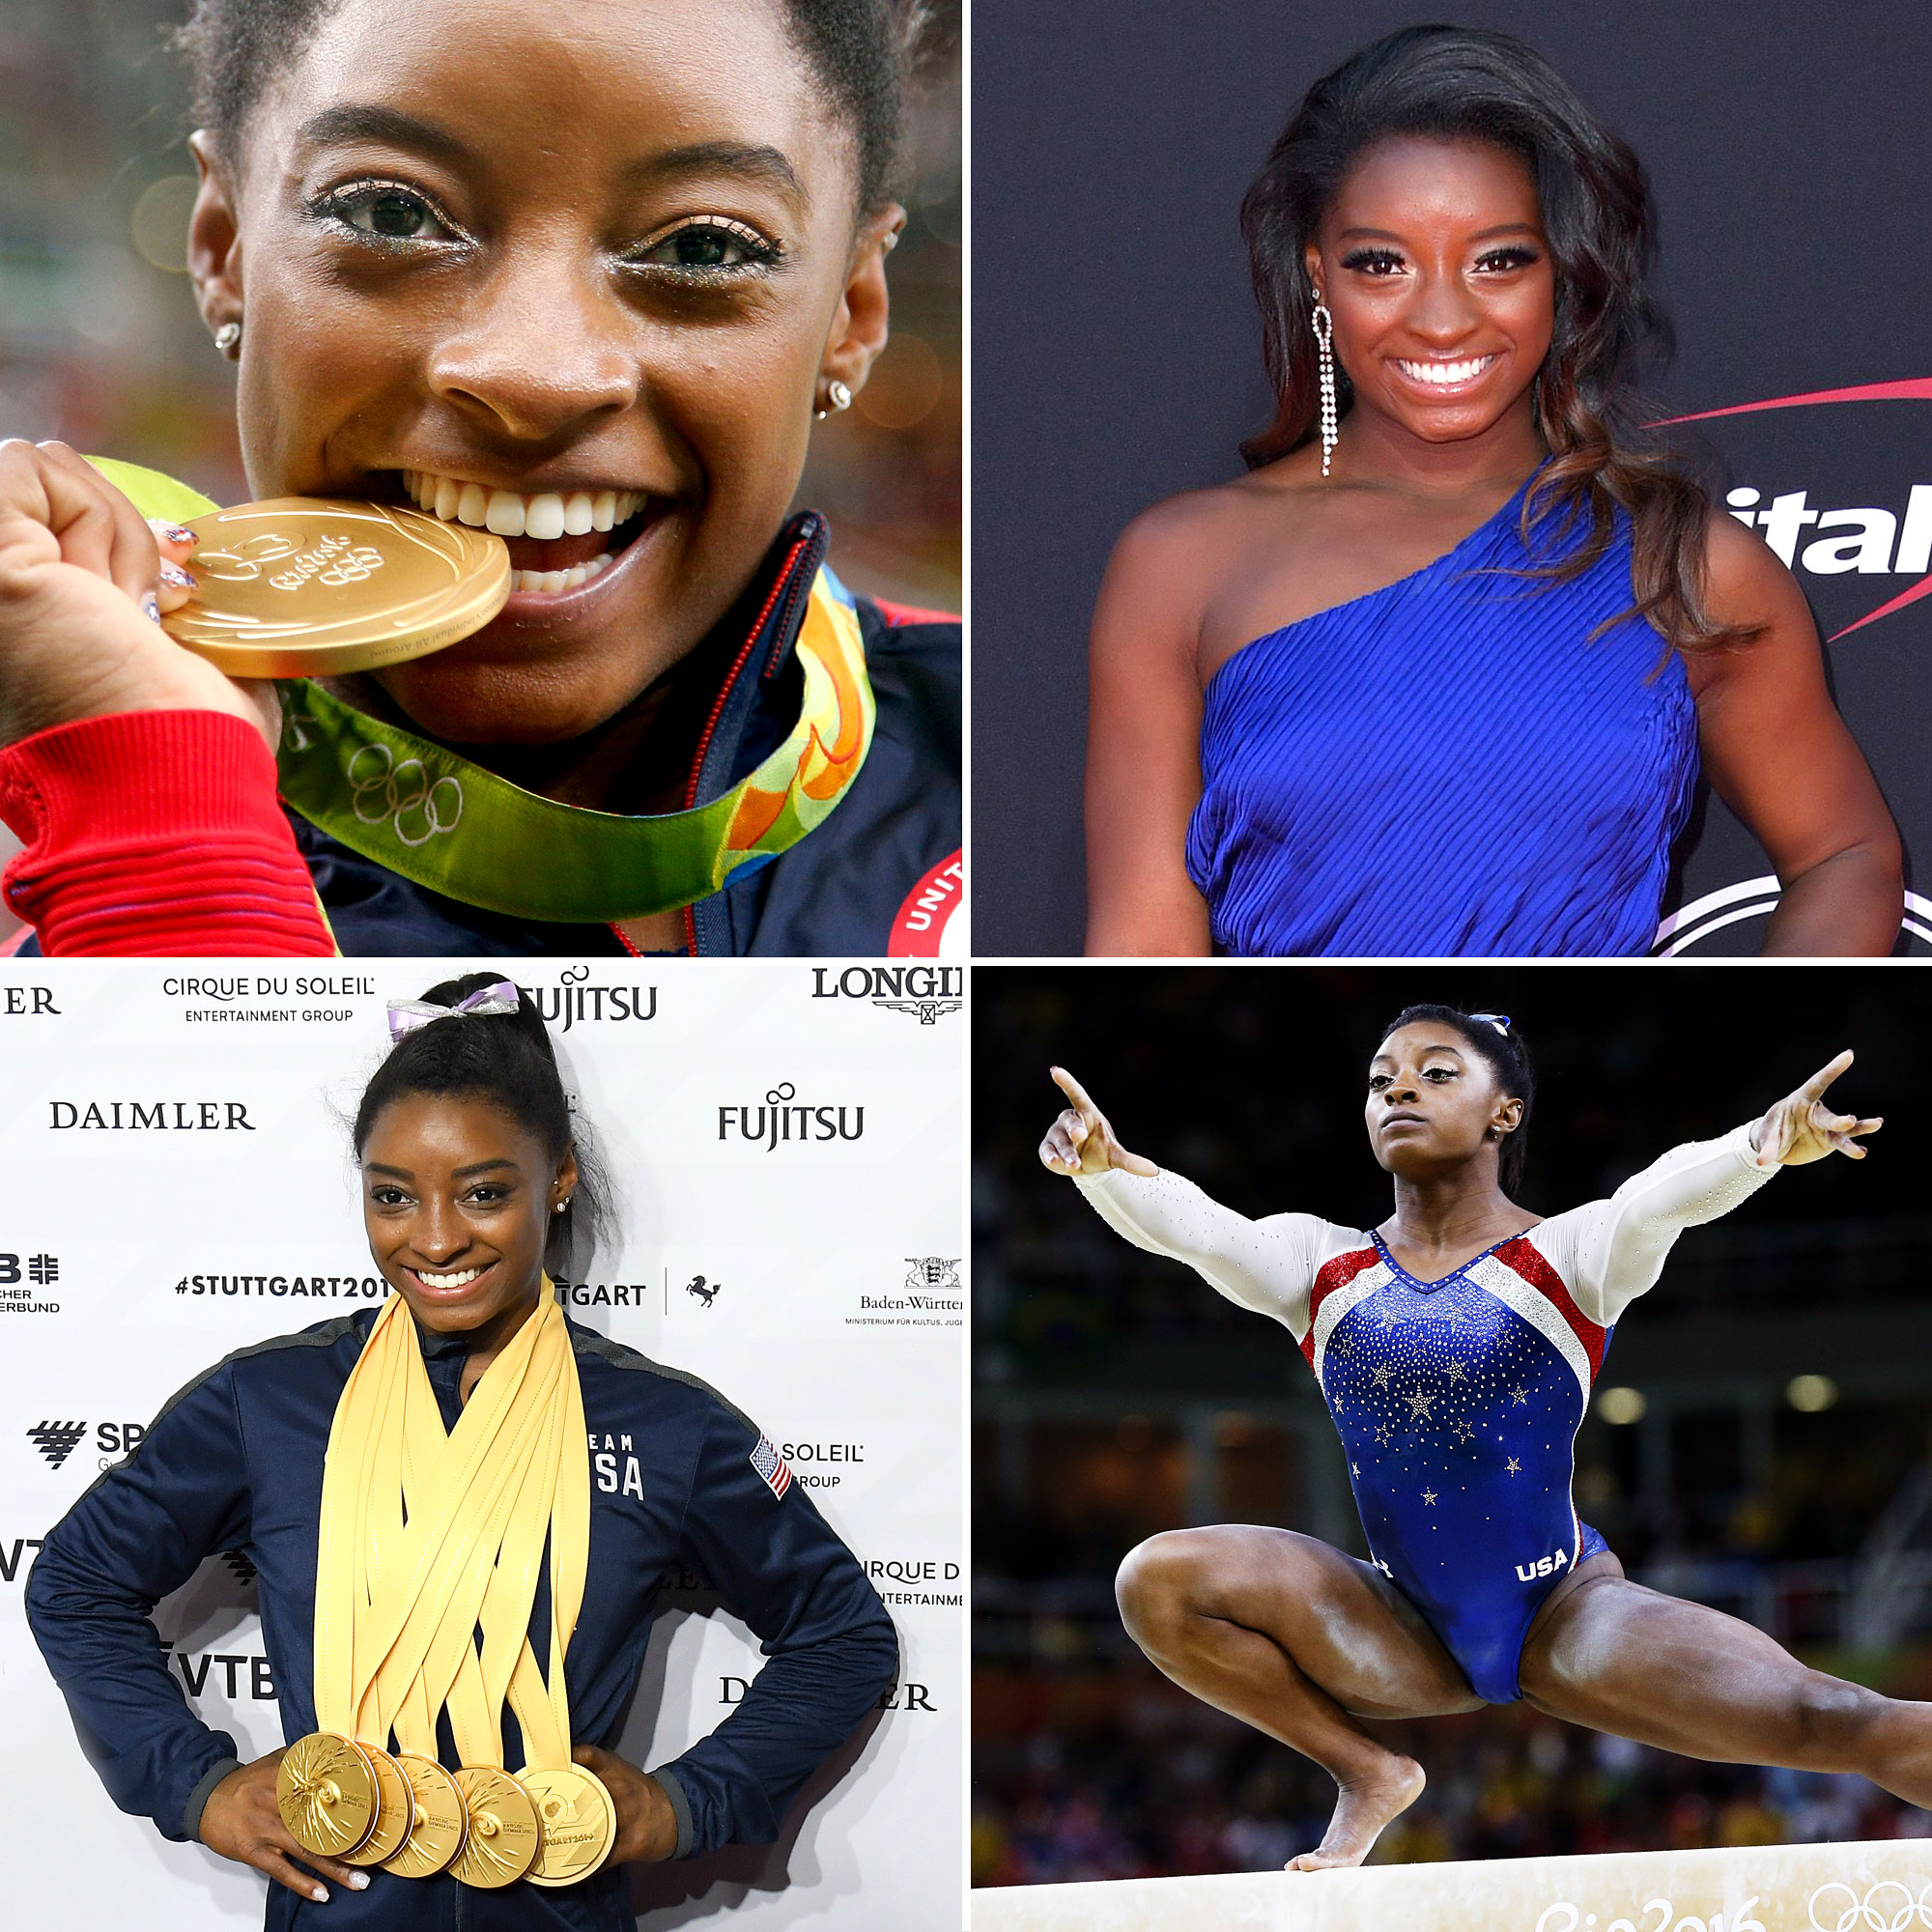 Simone Biles: Most medals won at the World Artistic Gymnastics